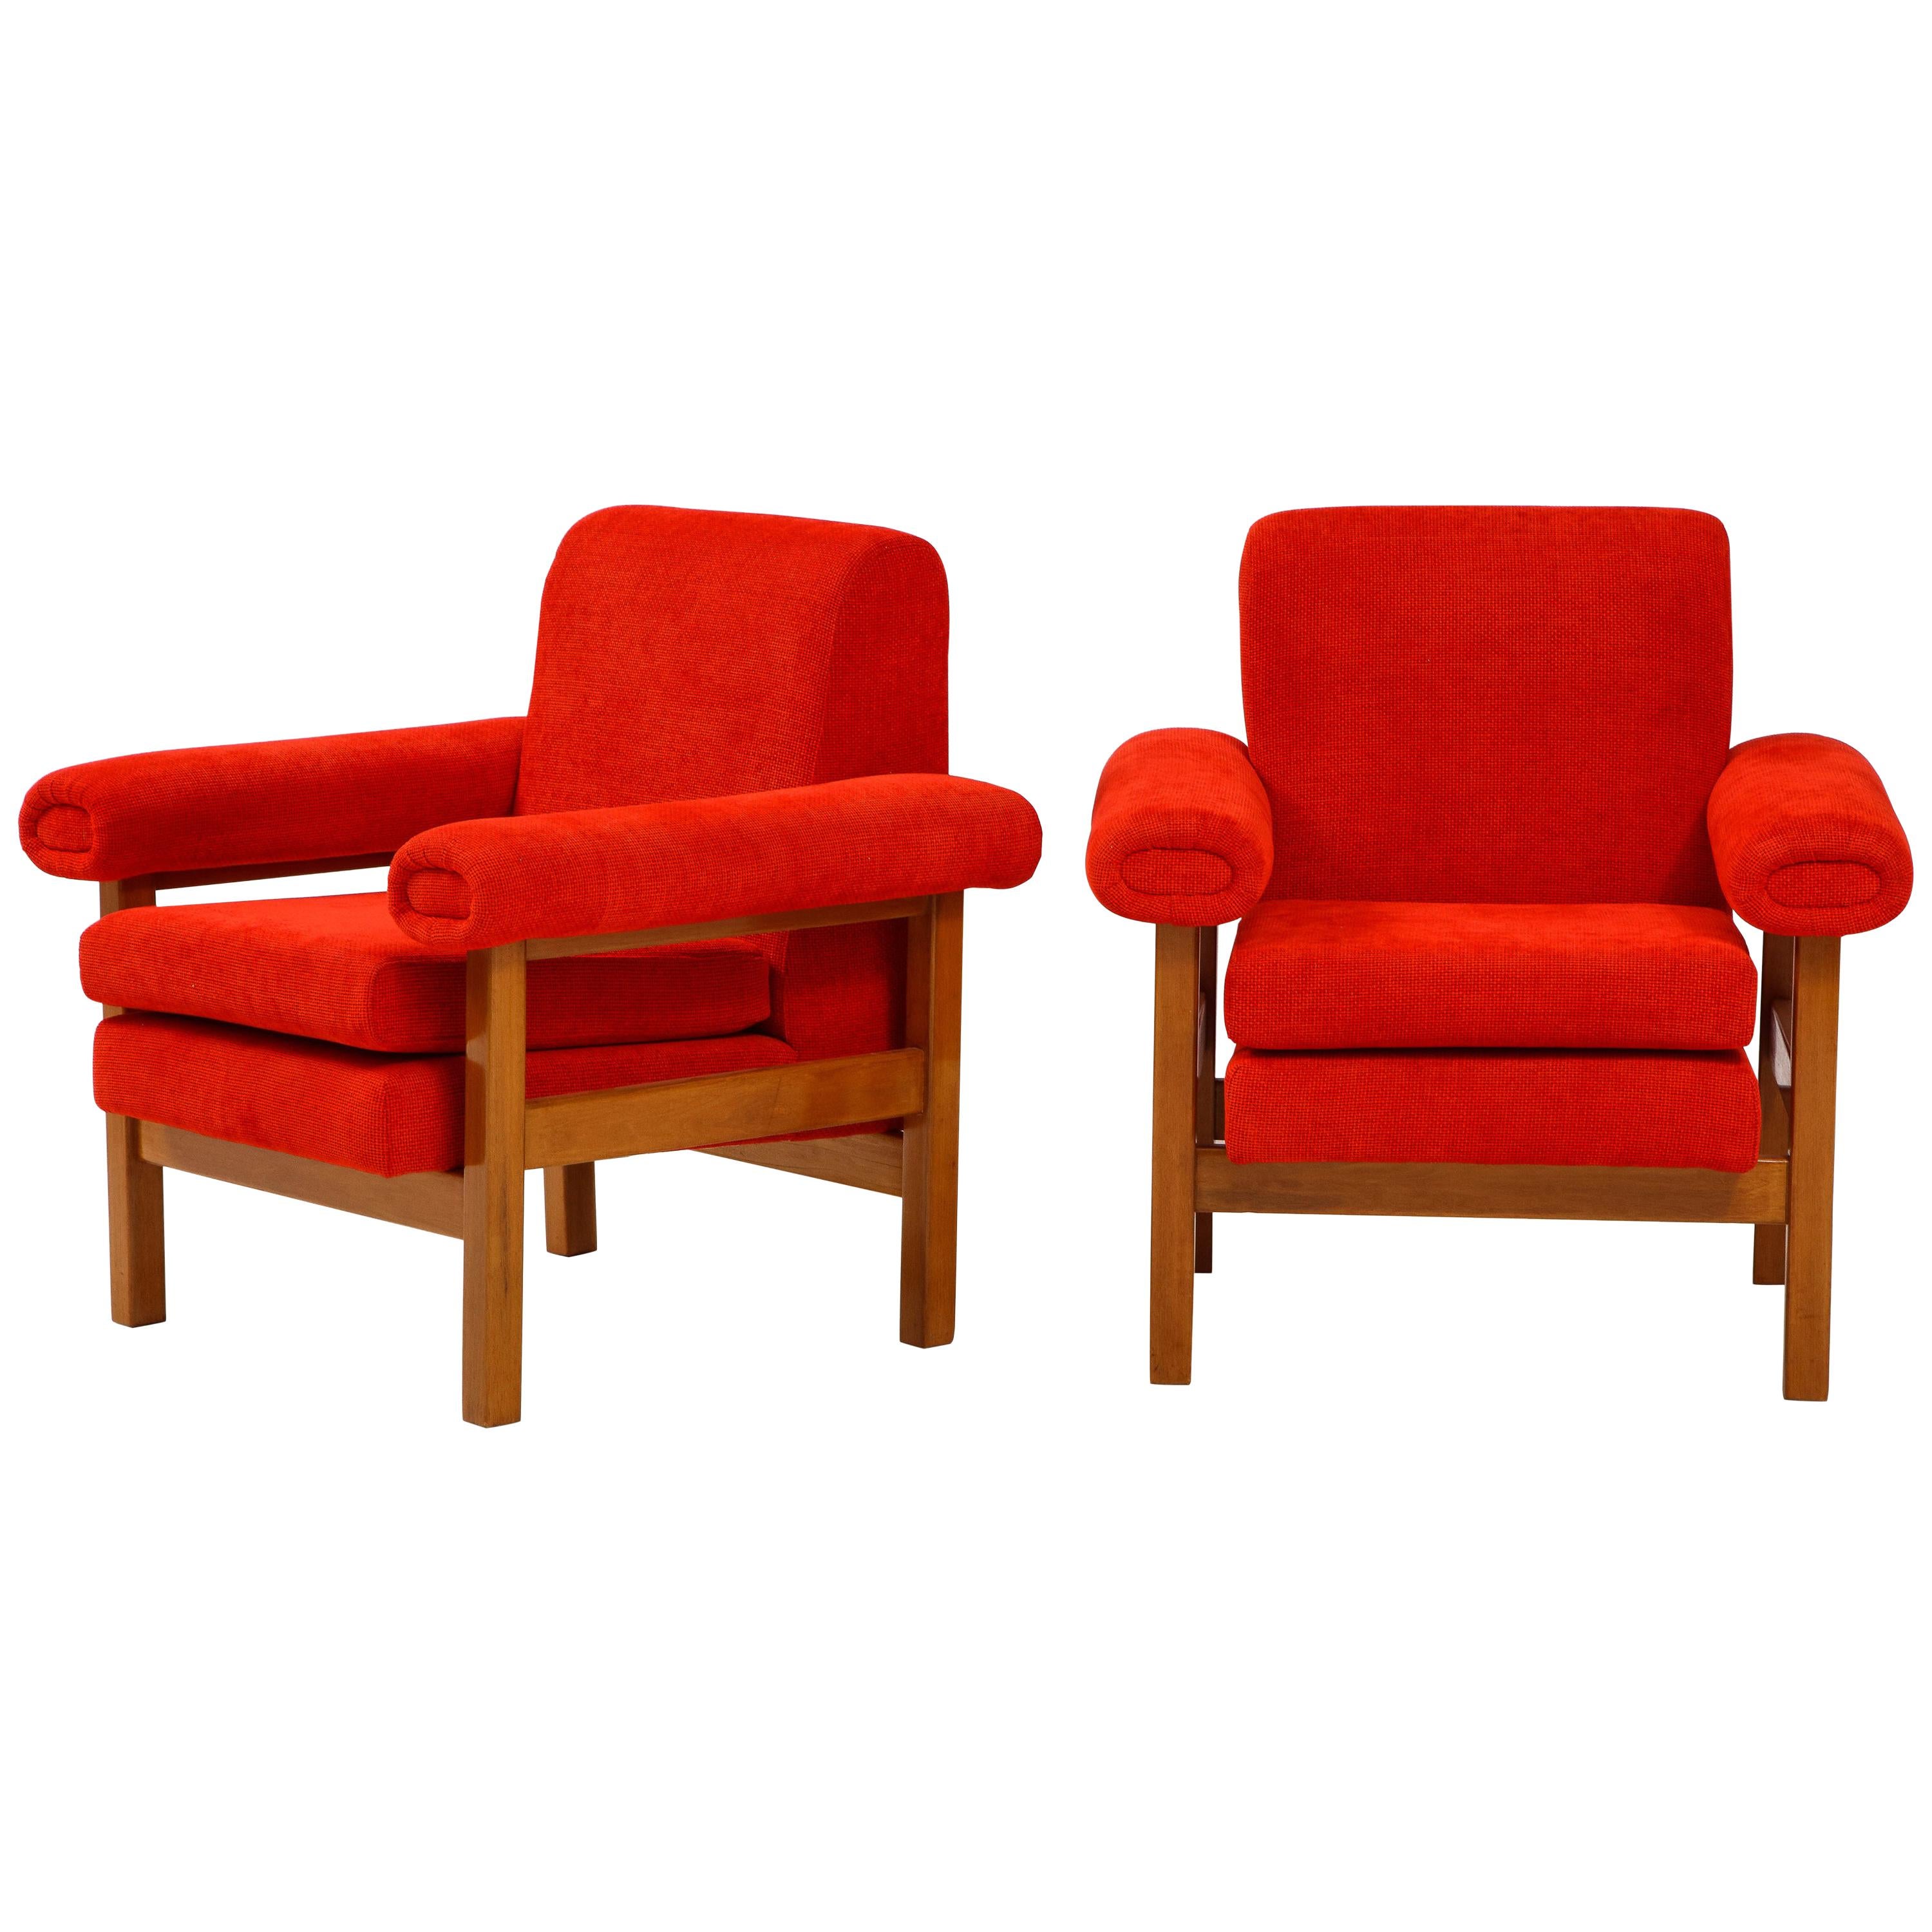 Pair of Oak Upholstered Armchairs by Raffaella Crespi